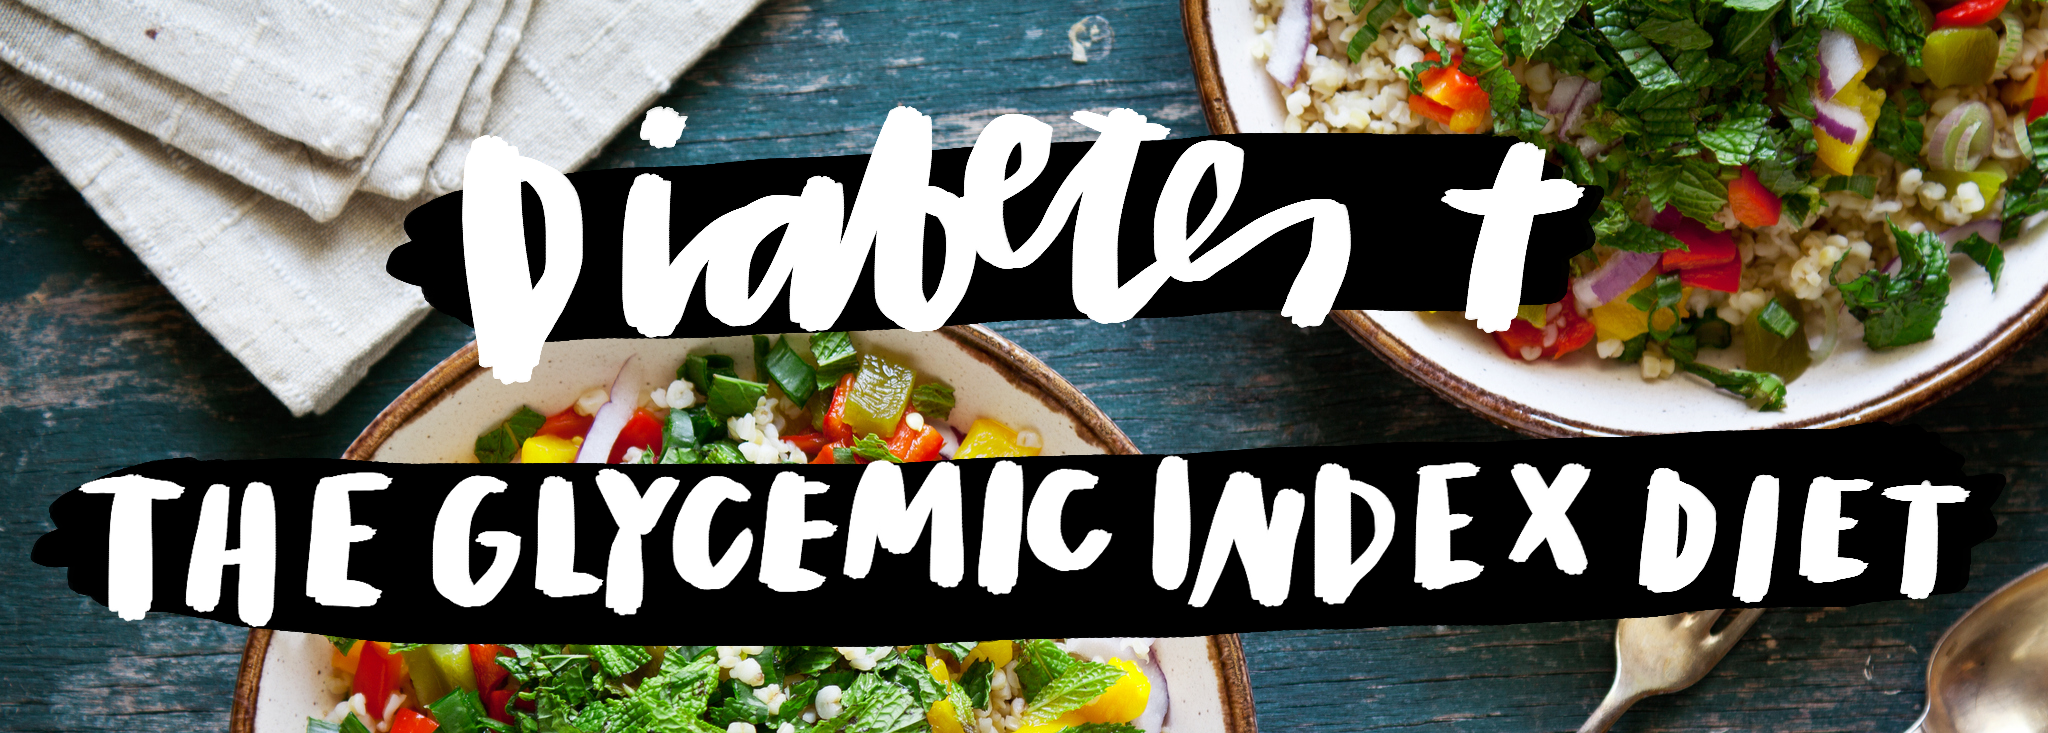 Glycemic Index Food Chart For Diabetes